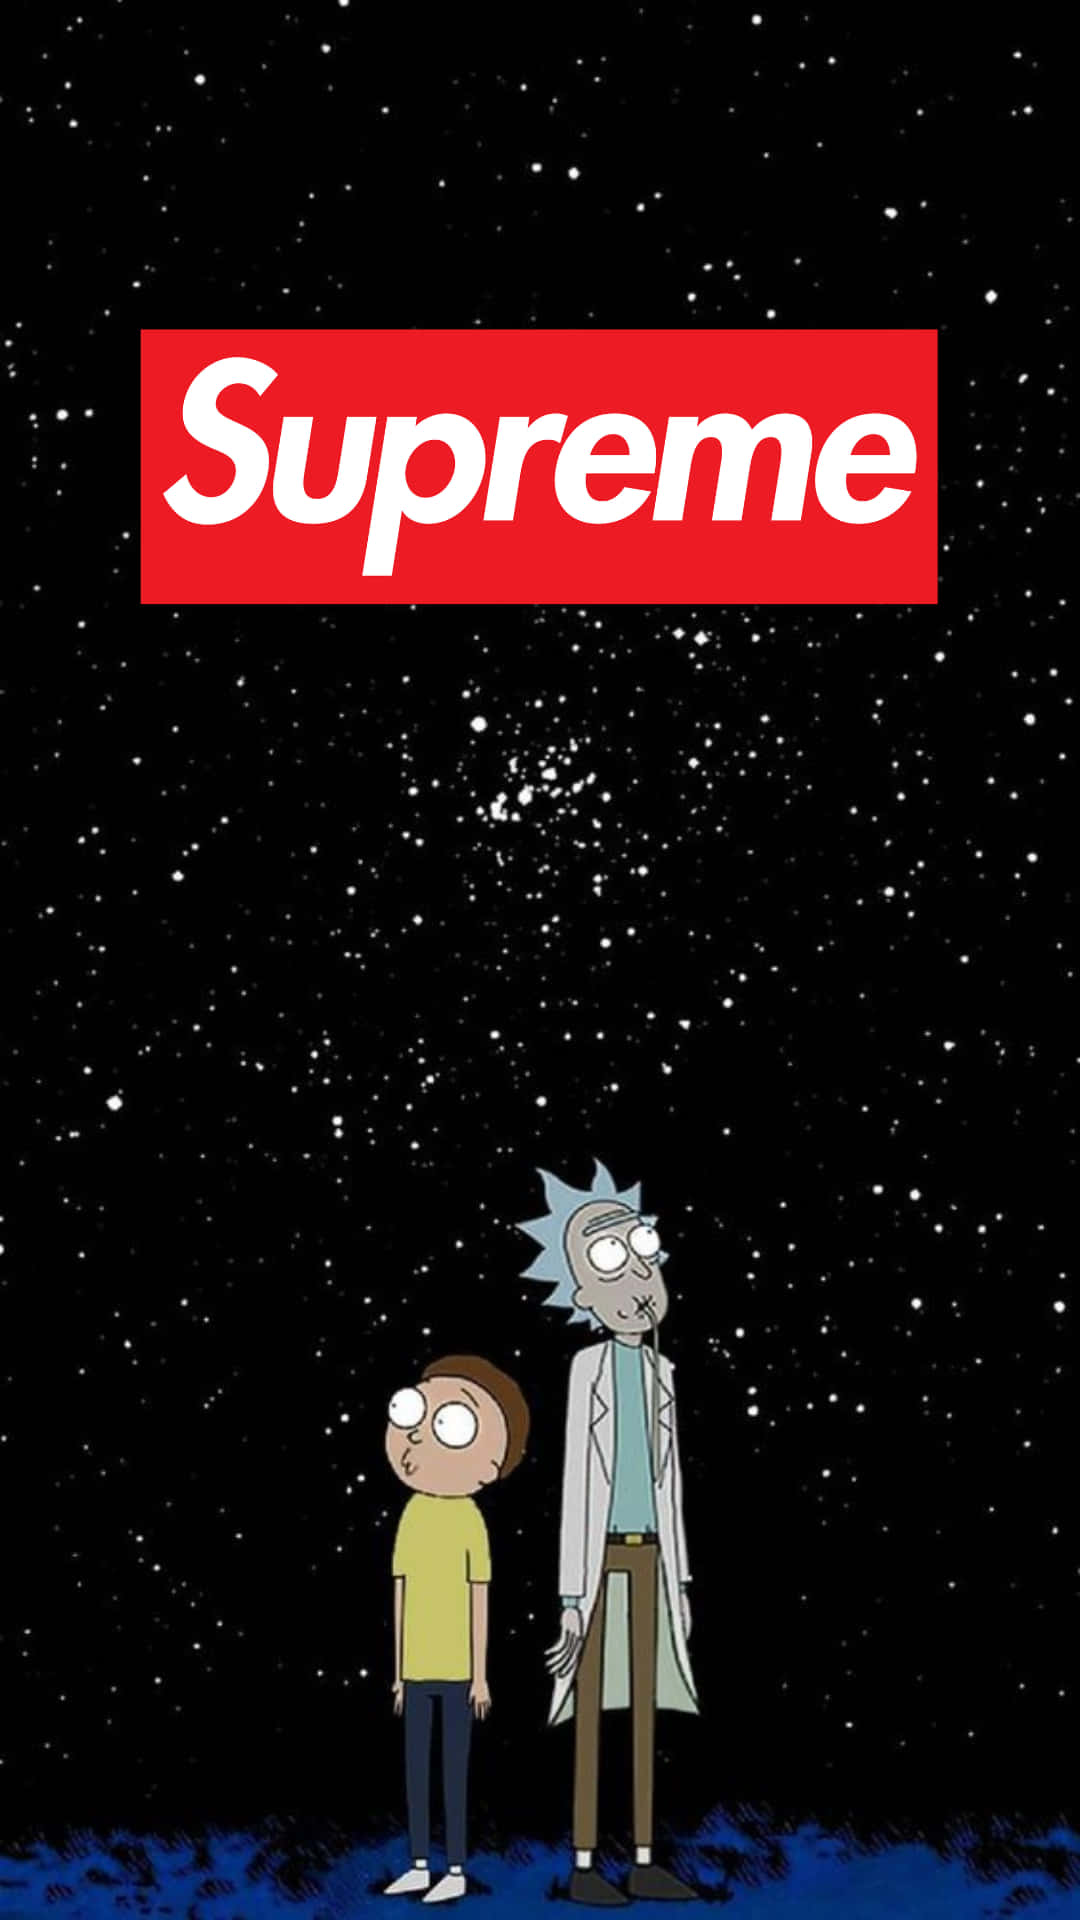 Download Stylish Rick And Morty Supreme Merchandise Wallpaper  Wallpapers com